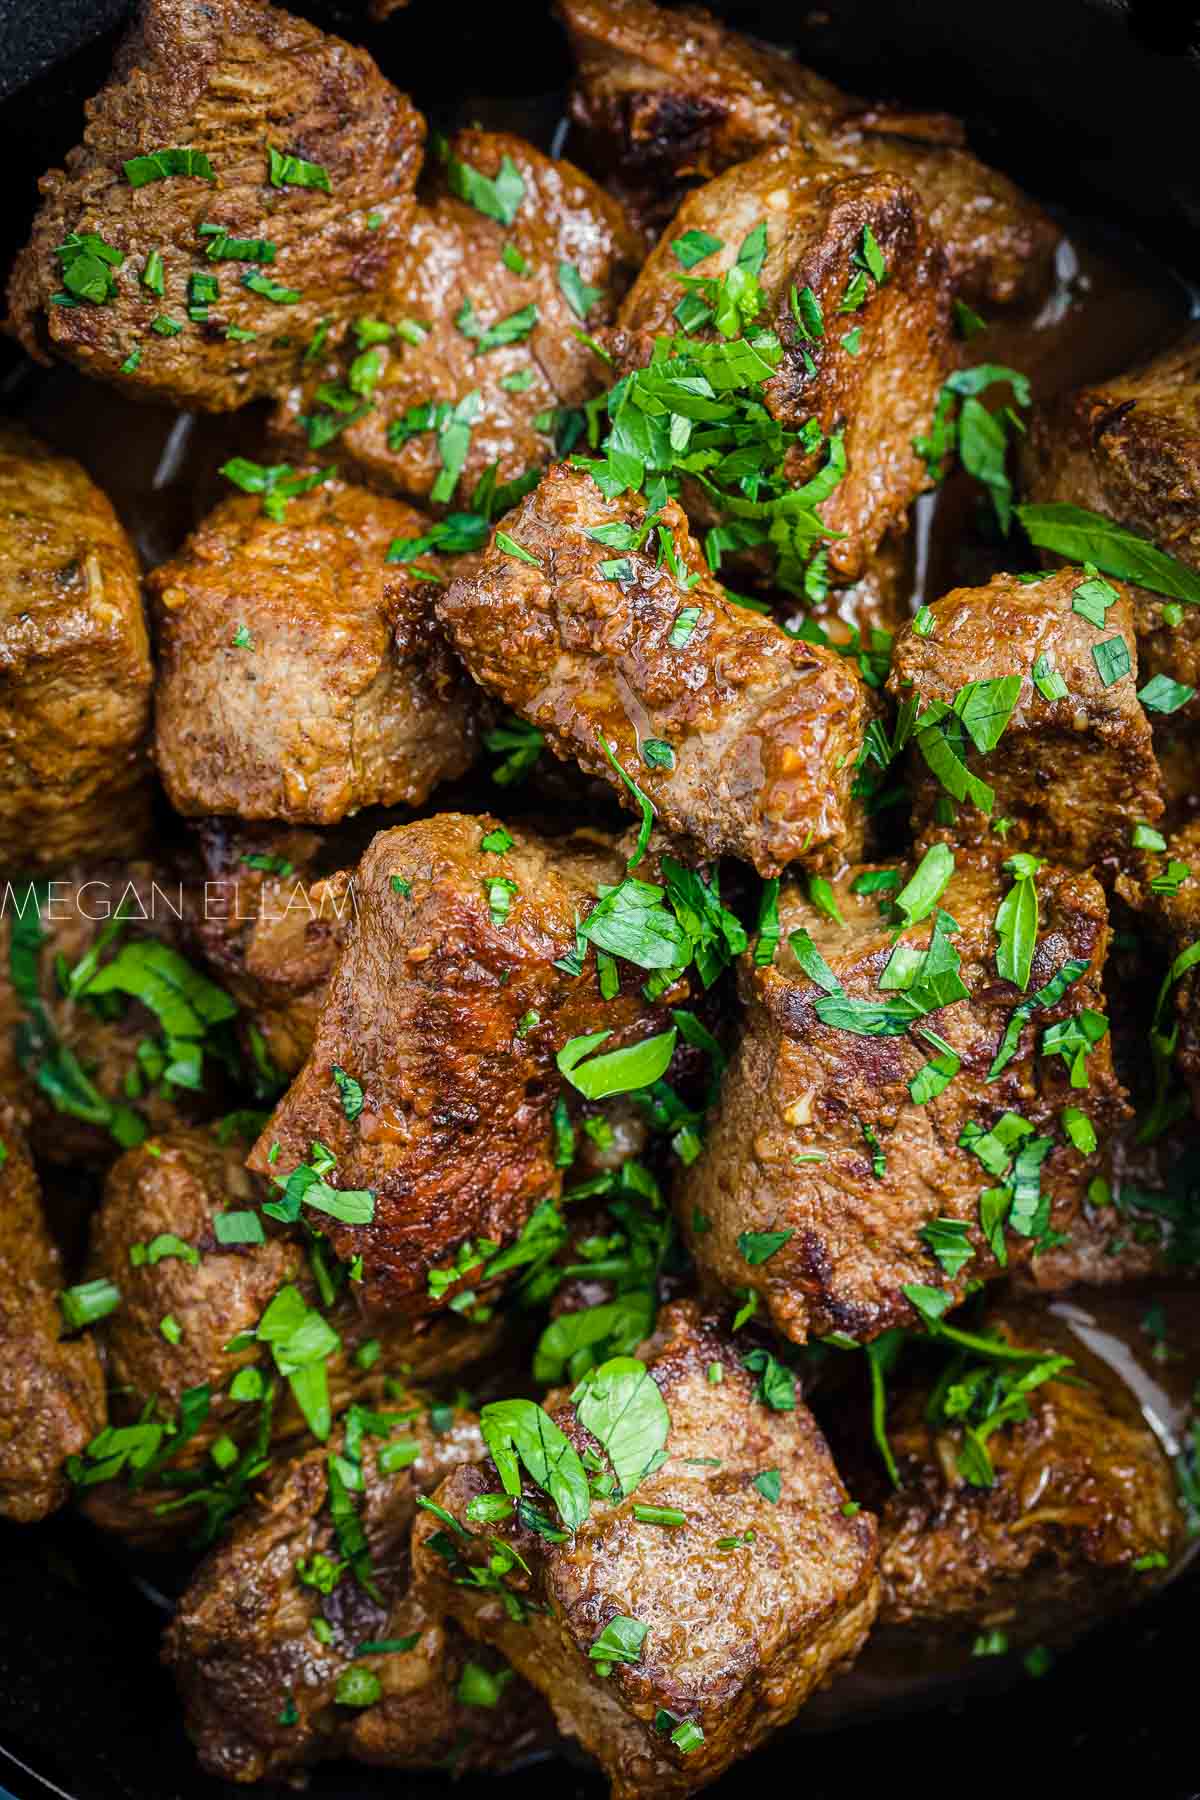 Steak bites with parsley on top.